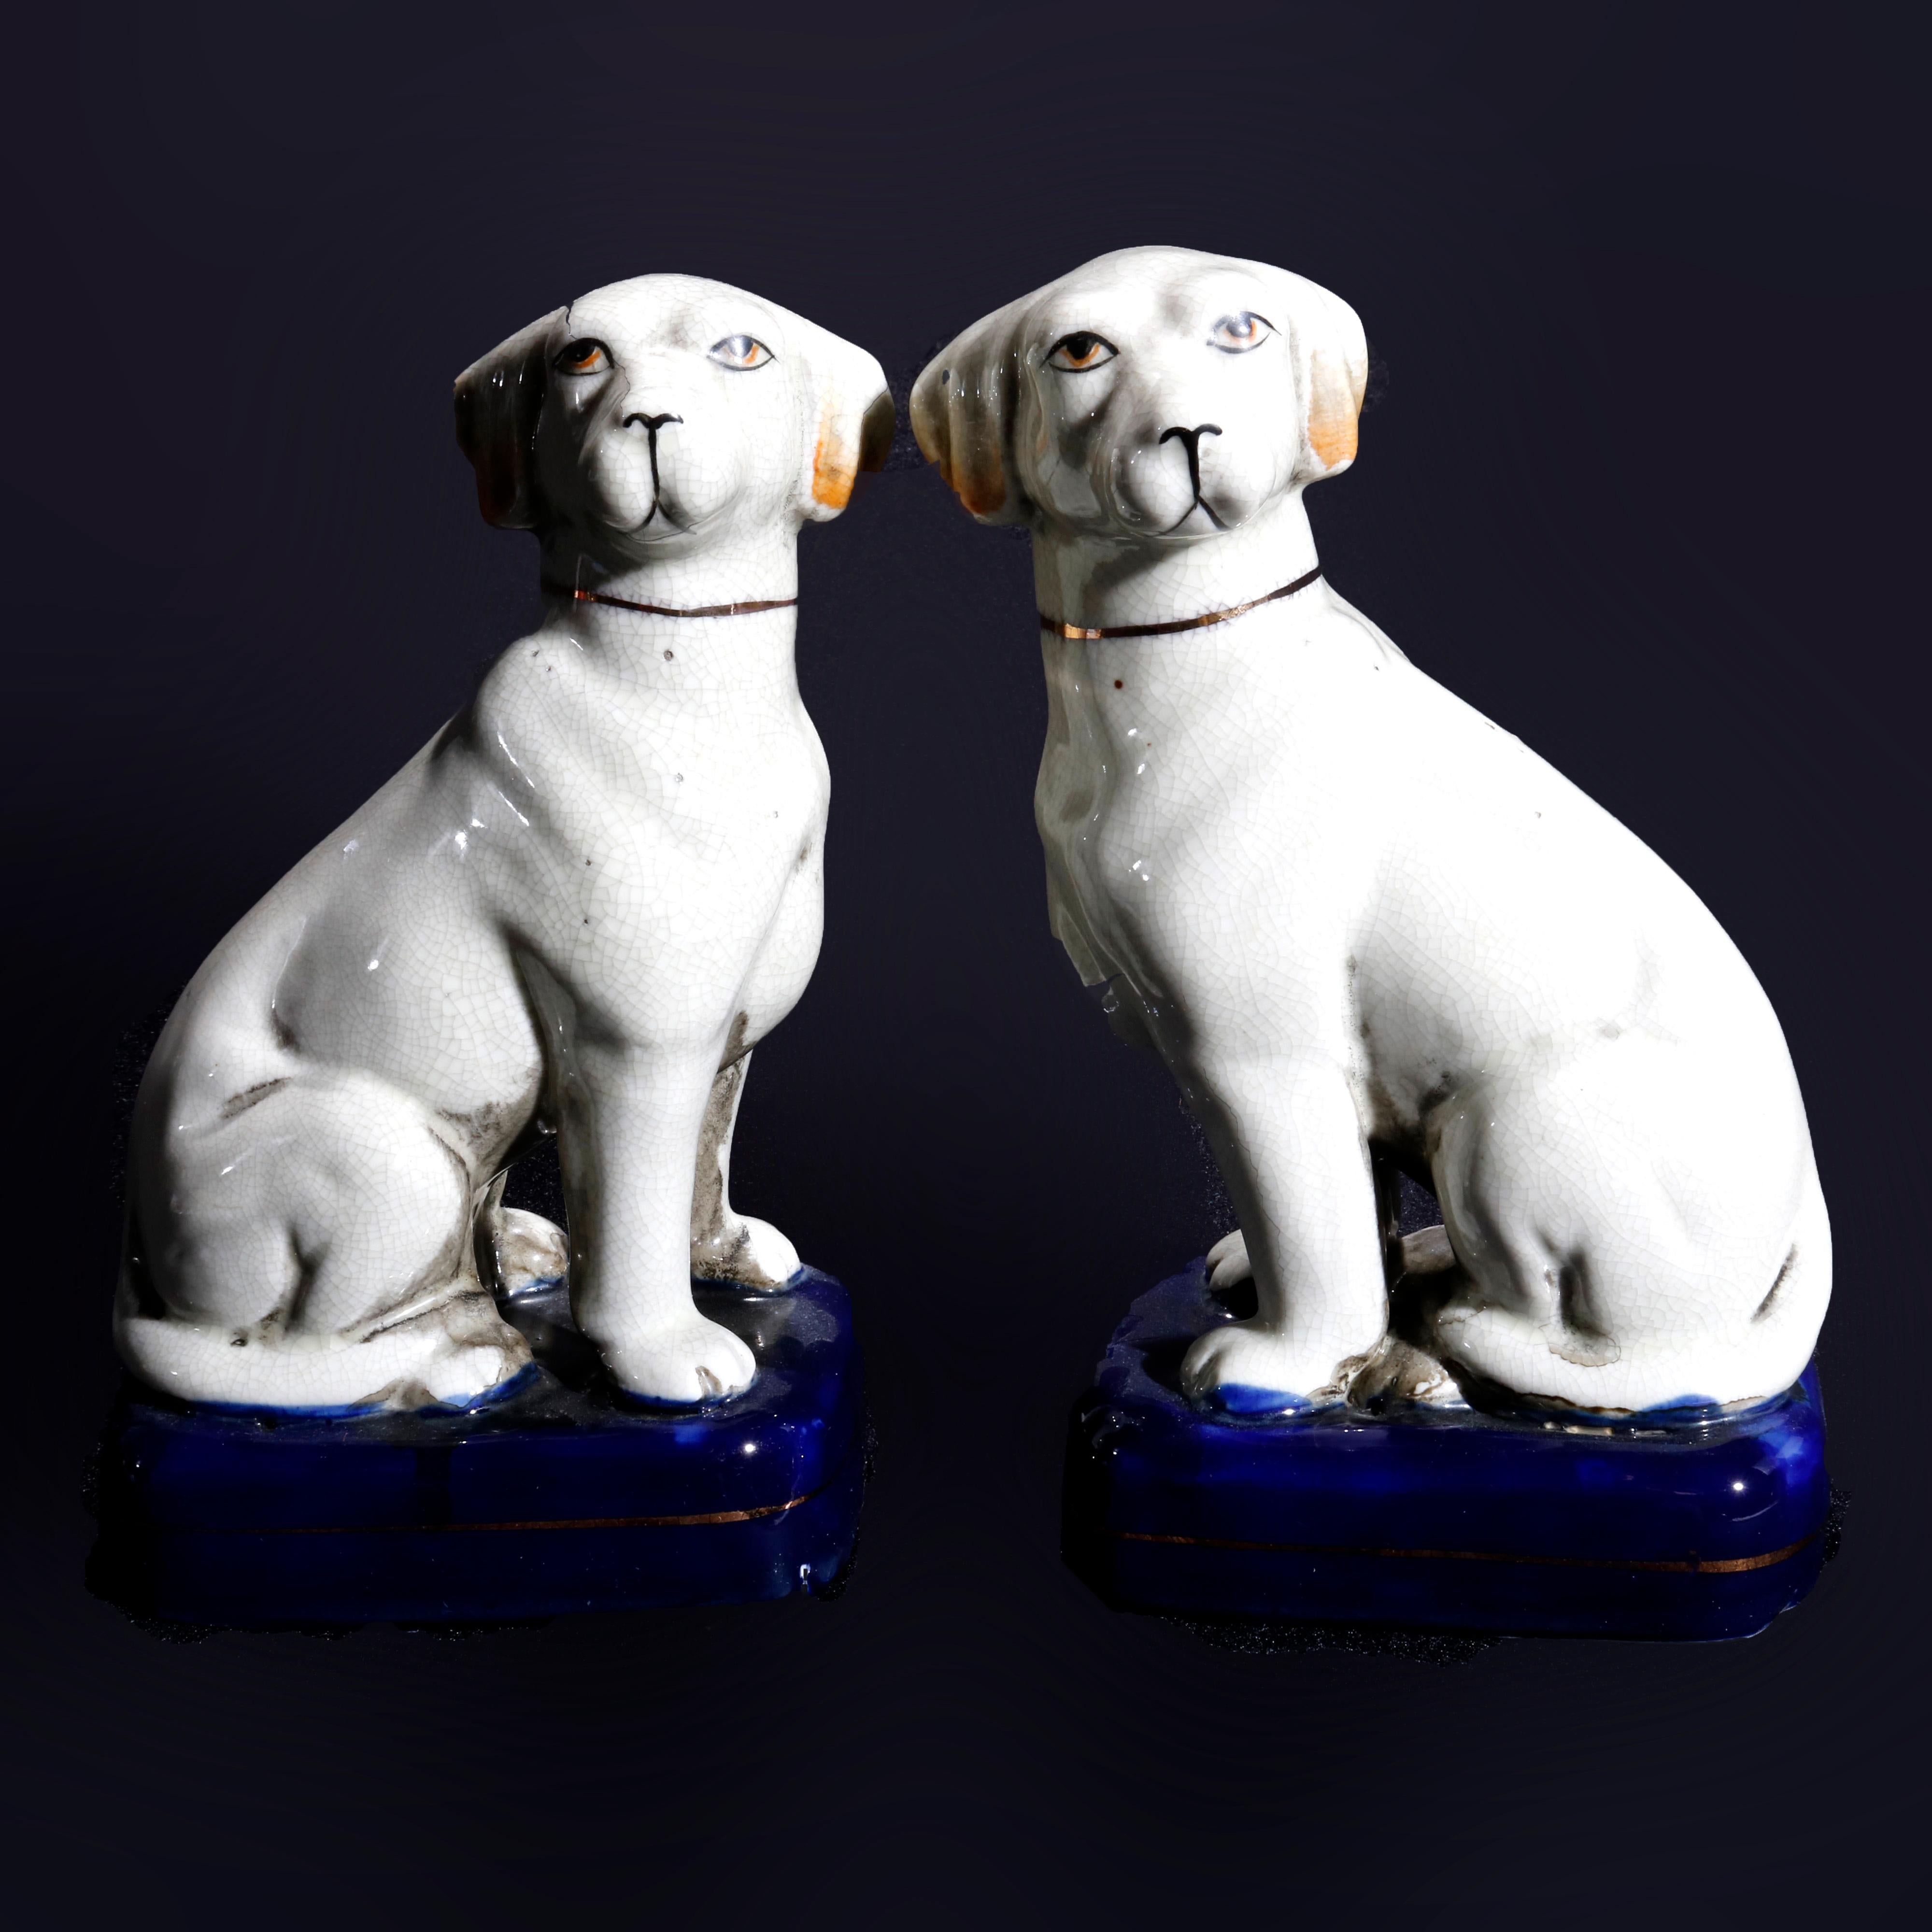 An antique pair of English Staffordshire porcelain figures depict seated dogs on cobalt plinth, 20th century.

Measures: 8